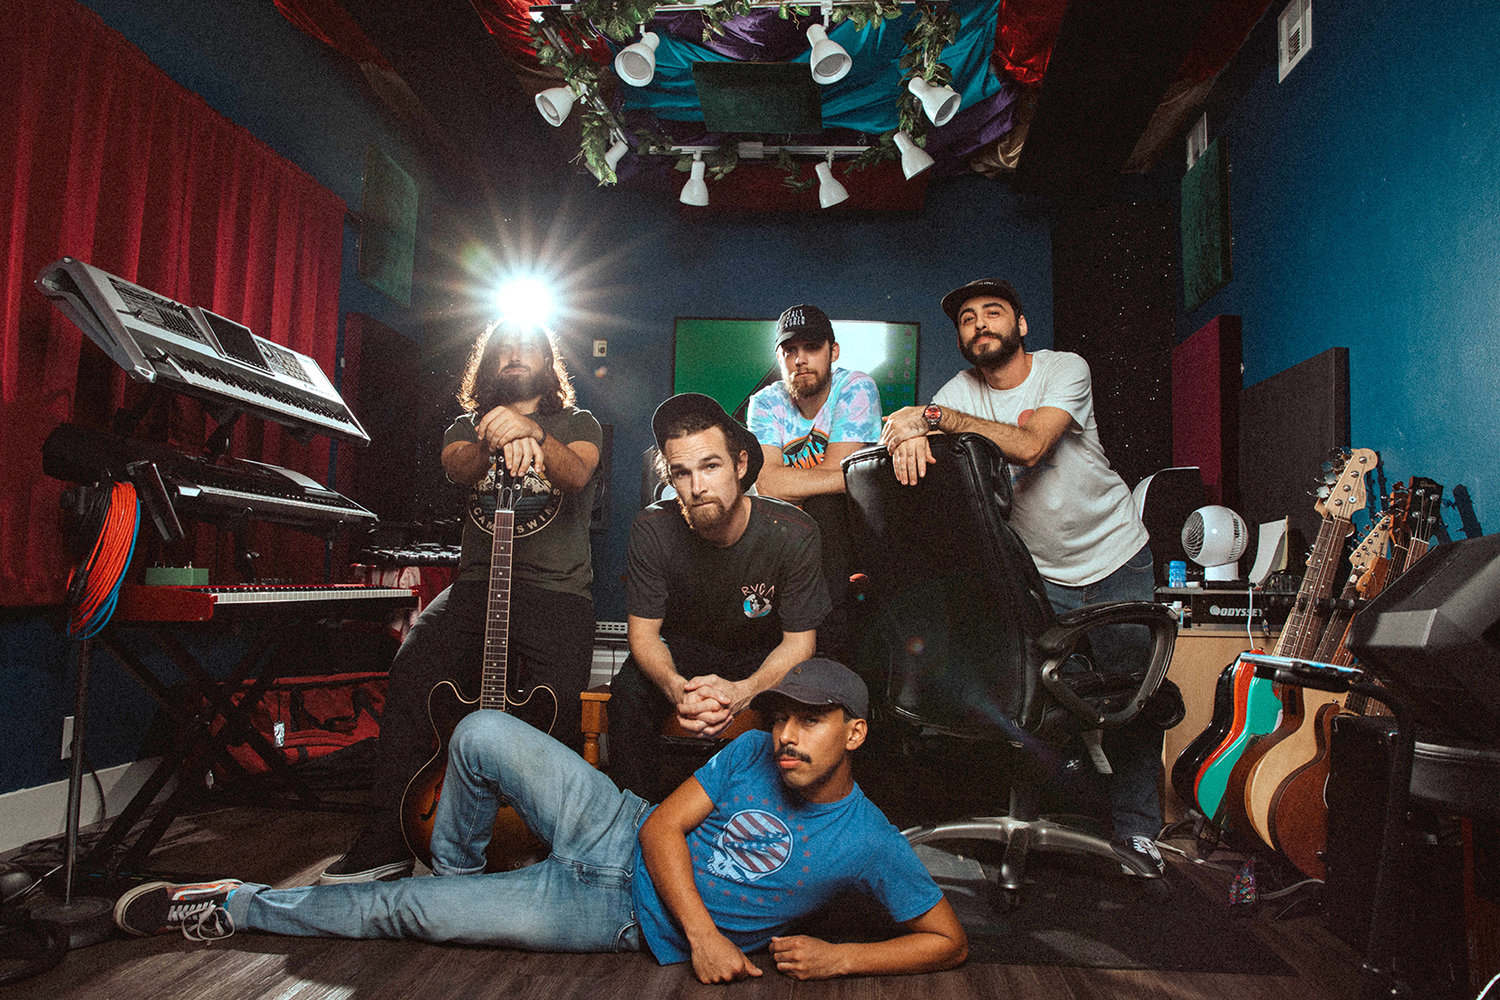 Tasty Vibrations, a five-piece band from Pompano Beach, has been chosen as a Destination Okeechobee winner and will be playing the Be Stage at the Okeechobee Music Festival in March.